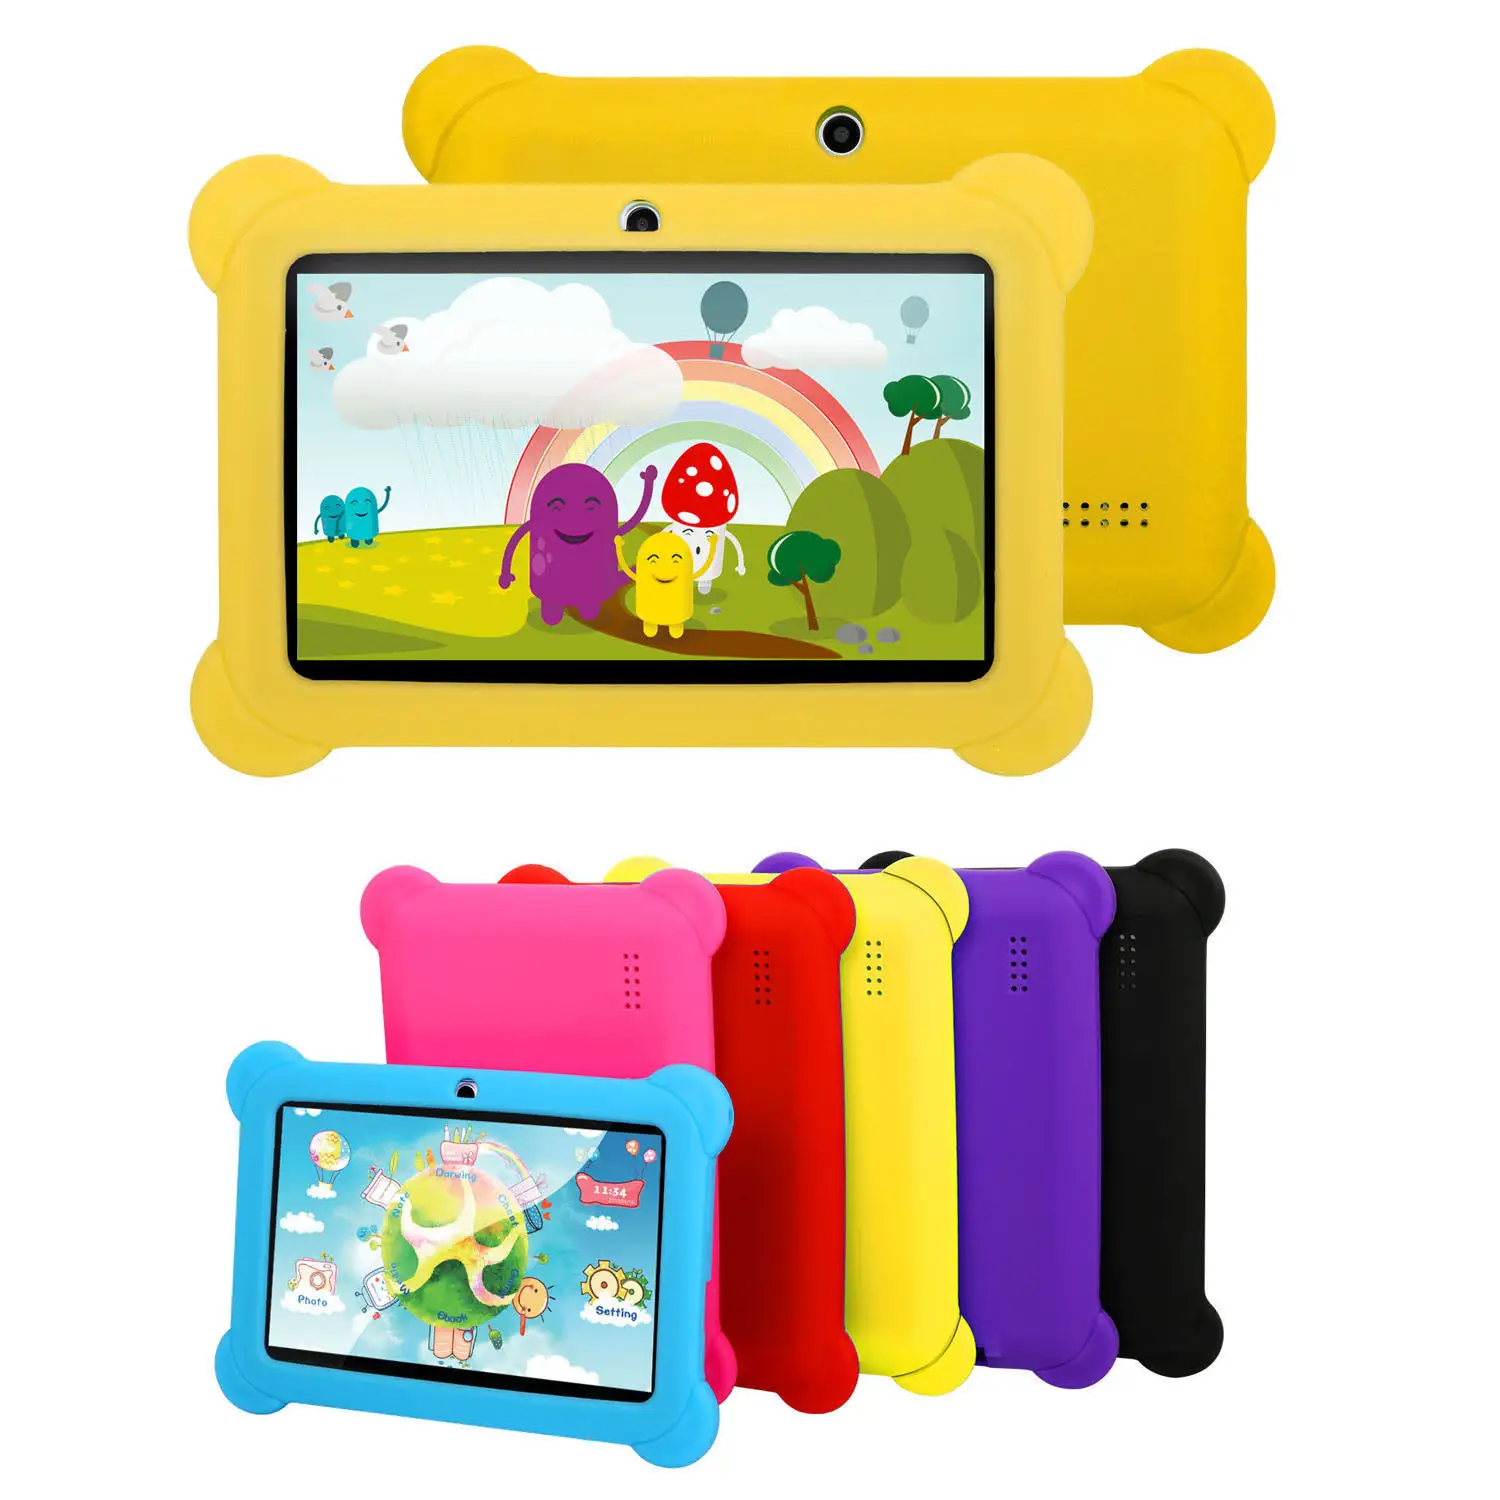 Children kids learn WiFi Android 7inch Android Tablet Android for Education and Home